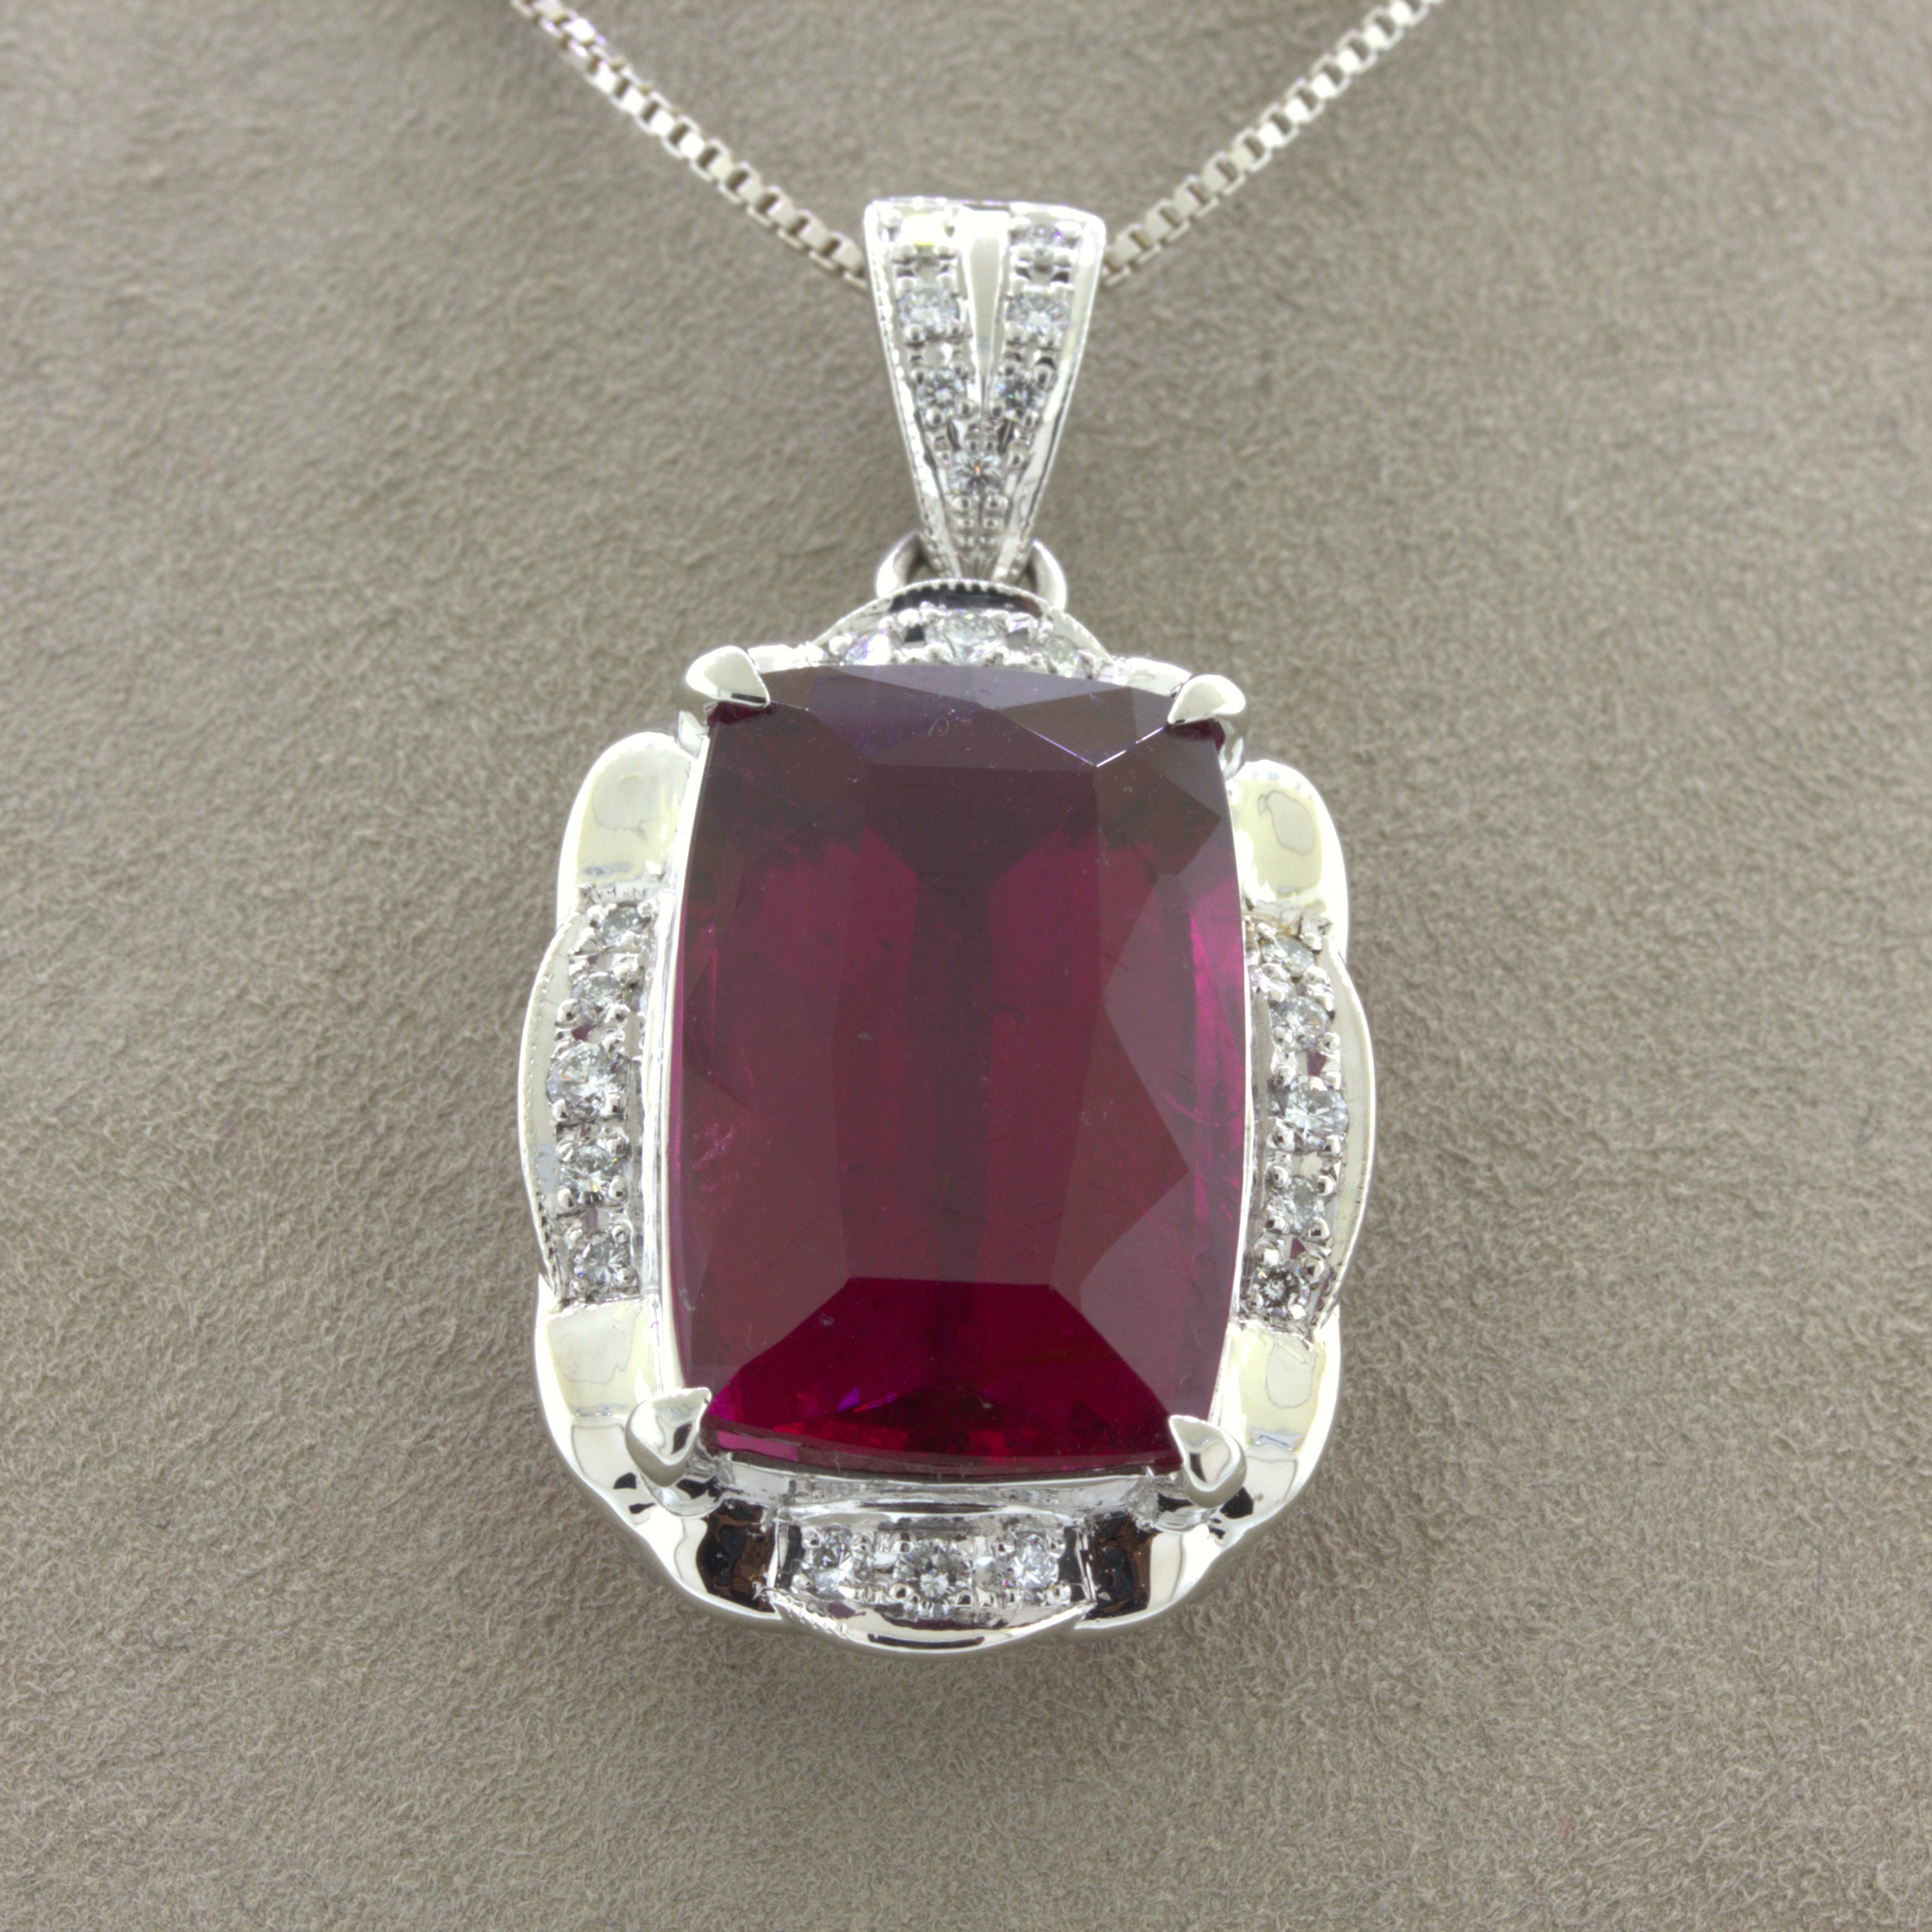 A very fine electric vivid red rubellite tourmaline takes center stage of this platinum pendant. It weighs an impressive 23.49 carats and has a super rich vivid color that will mesmerize anyone who looks into the stone. It is complemented by 0.39